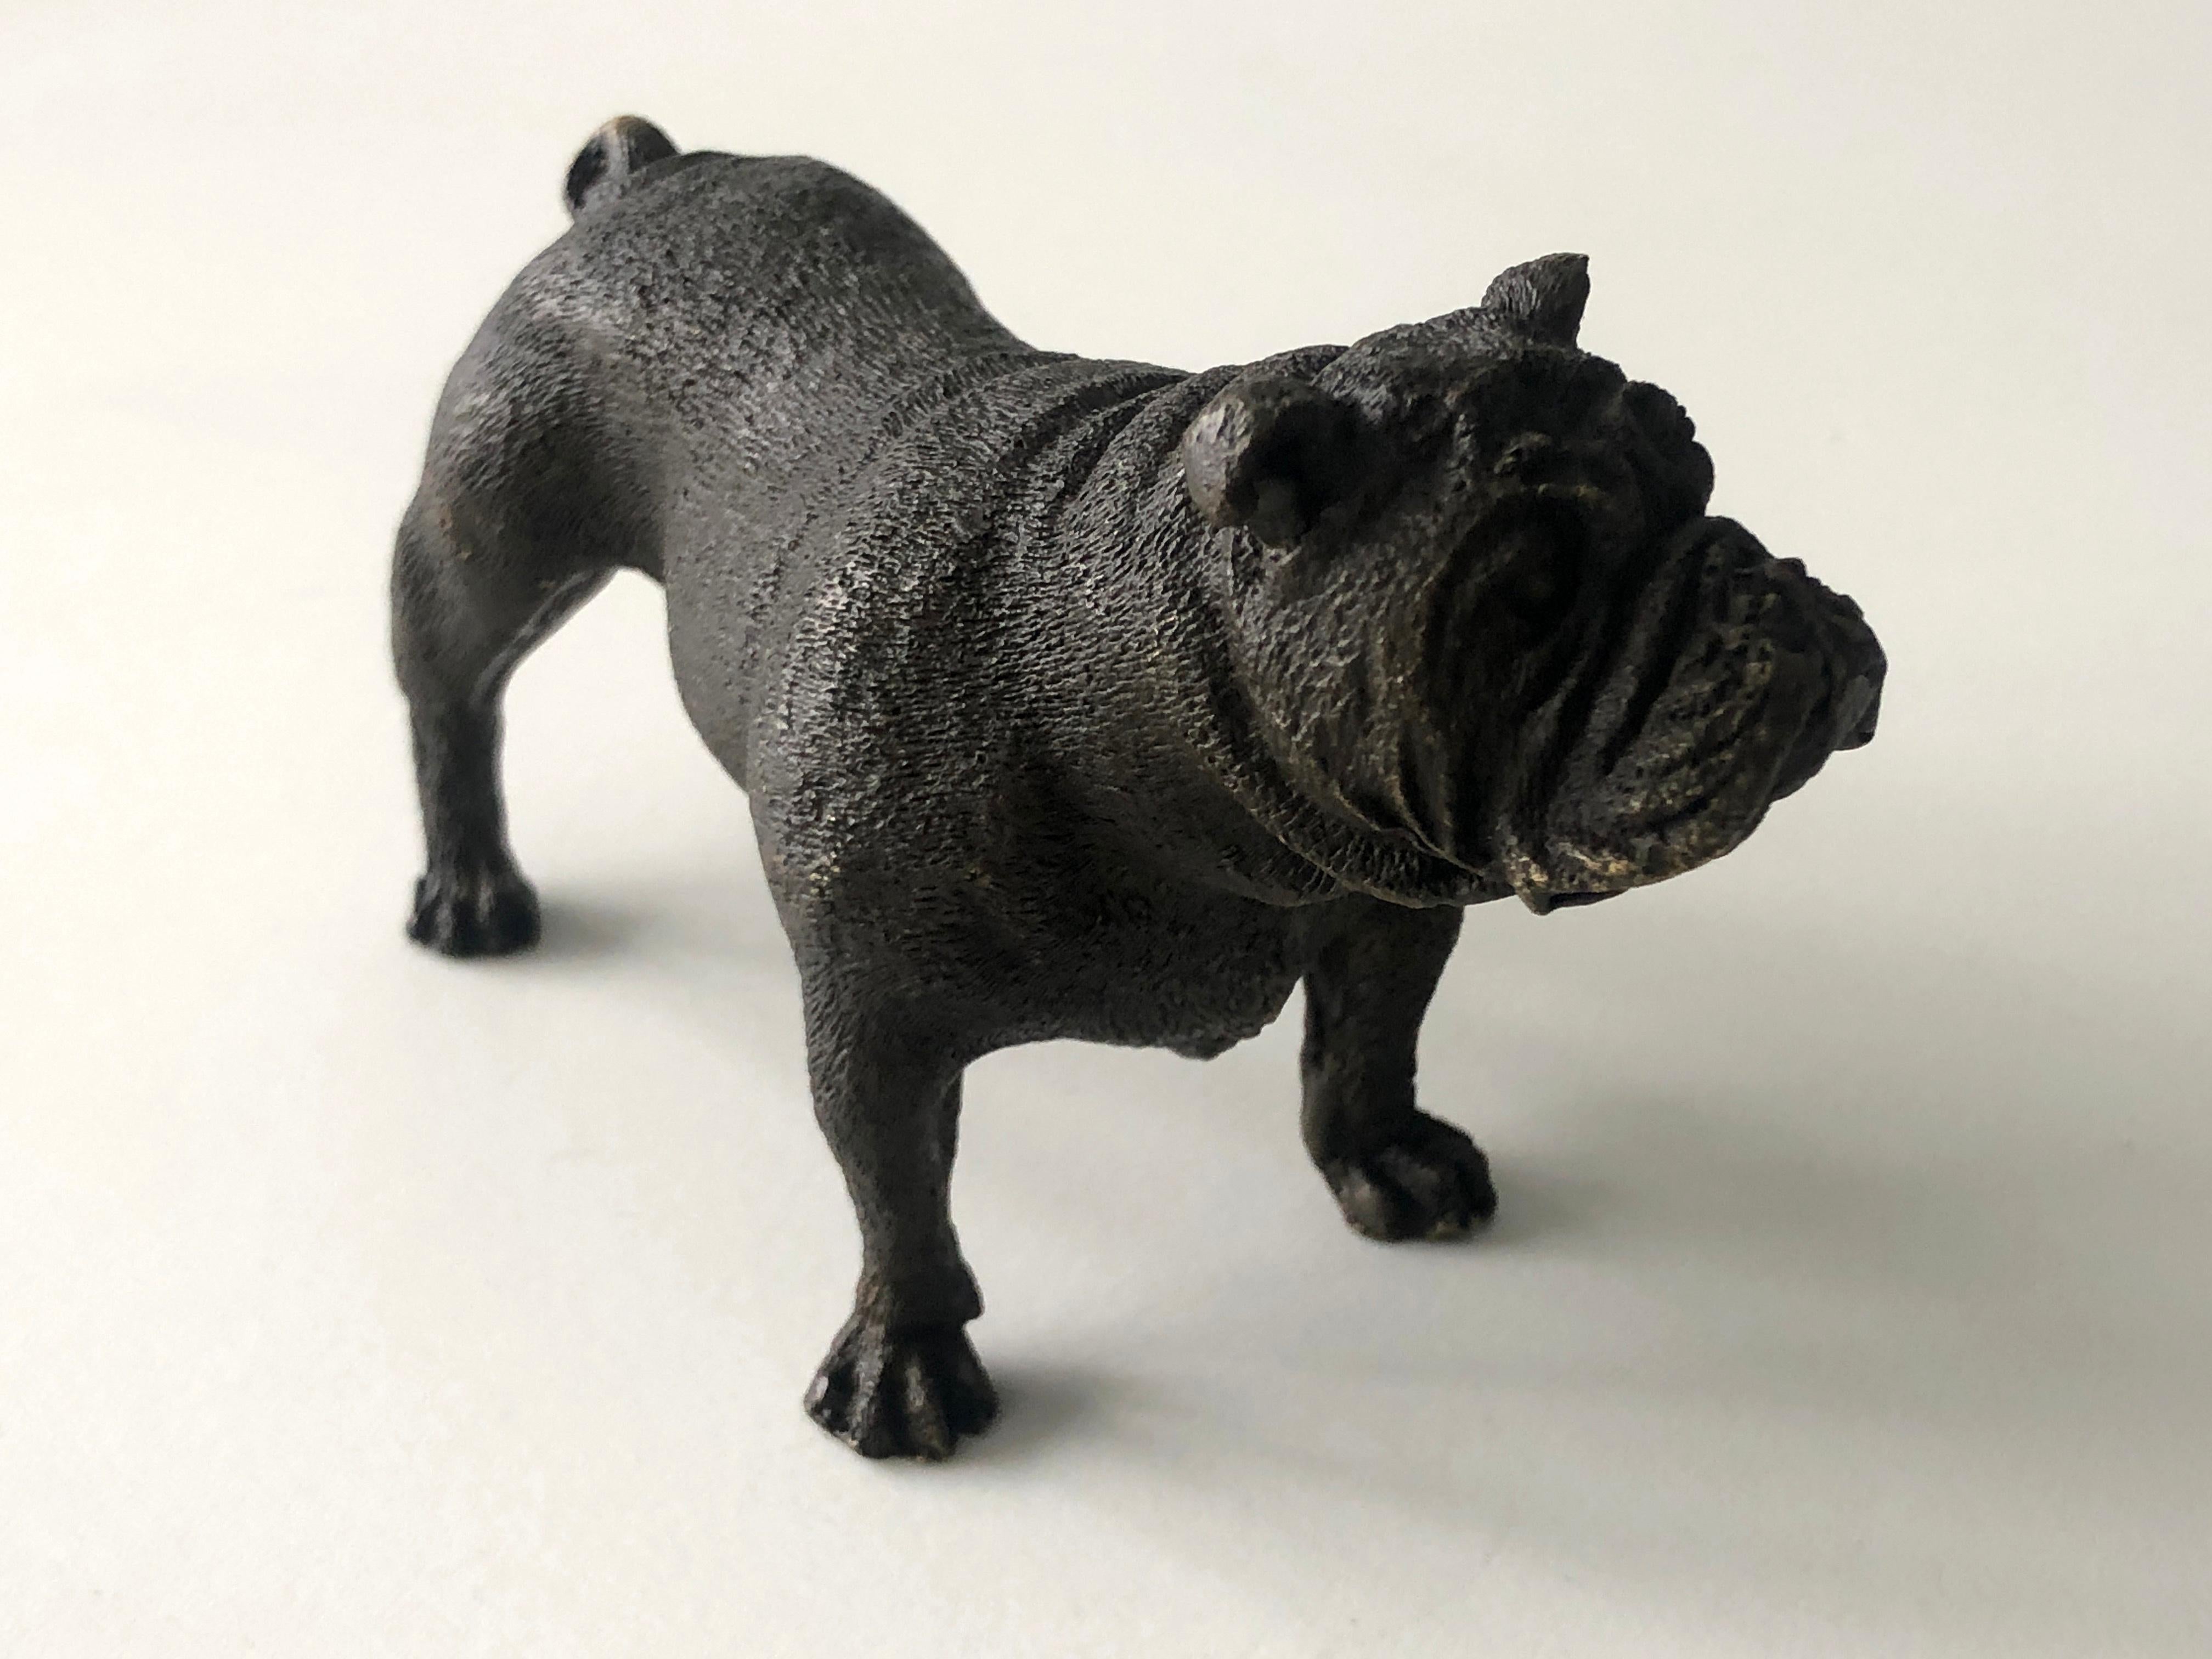 This 20th Century Austrian Vienna Bronze depicts a standing English Bulldog, attributed to Franz Bergman (Mangreb). Crafted with exquisite detail, the piece showcases a warm dark brown patina, characteristic of Bergman's work.

Signed by Bergman and